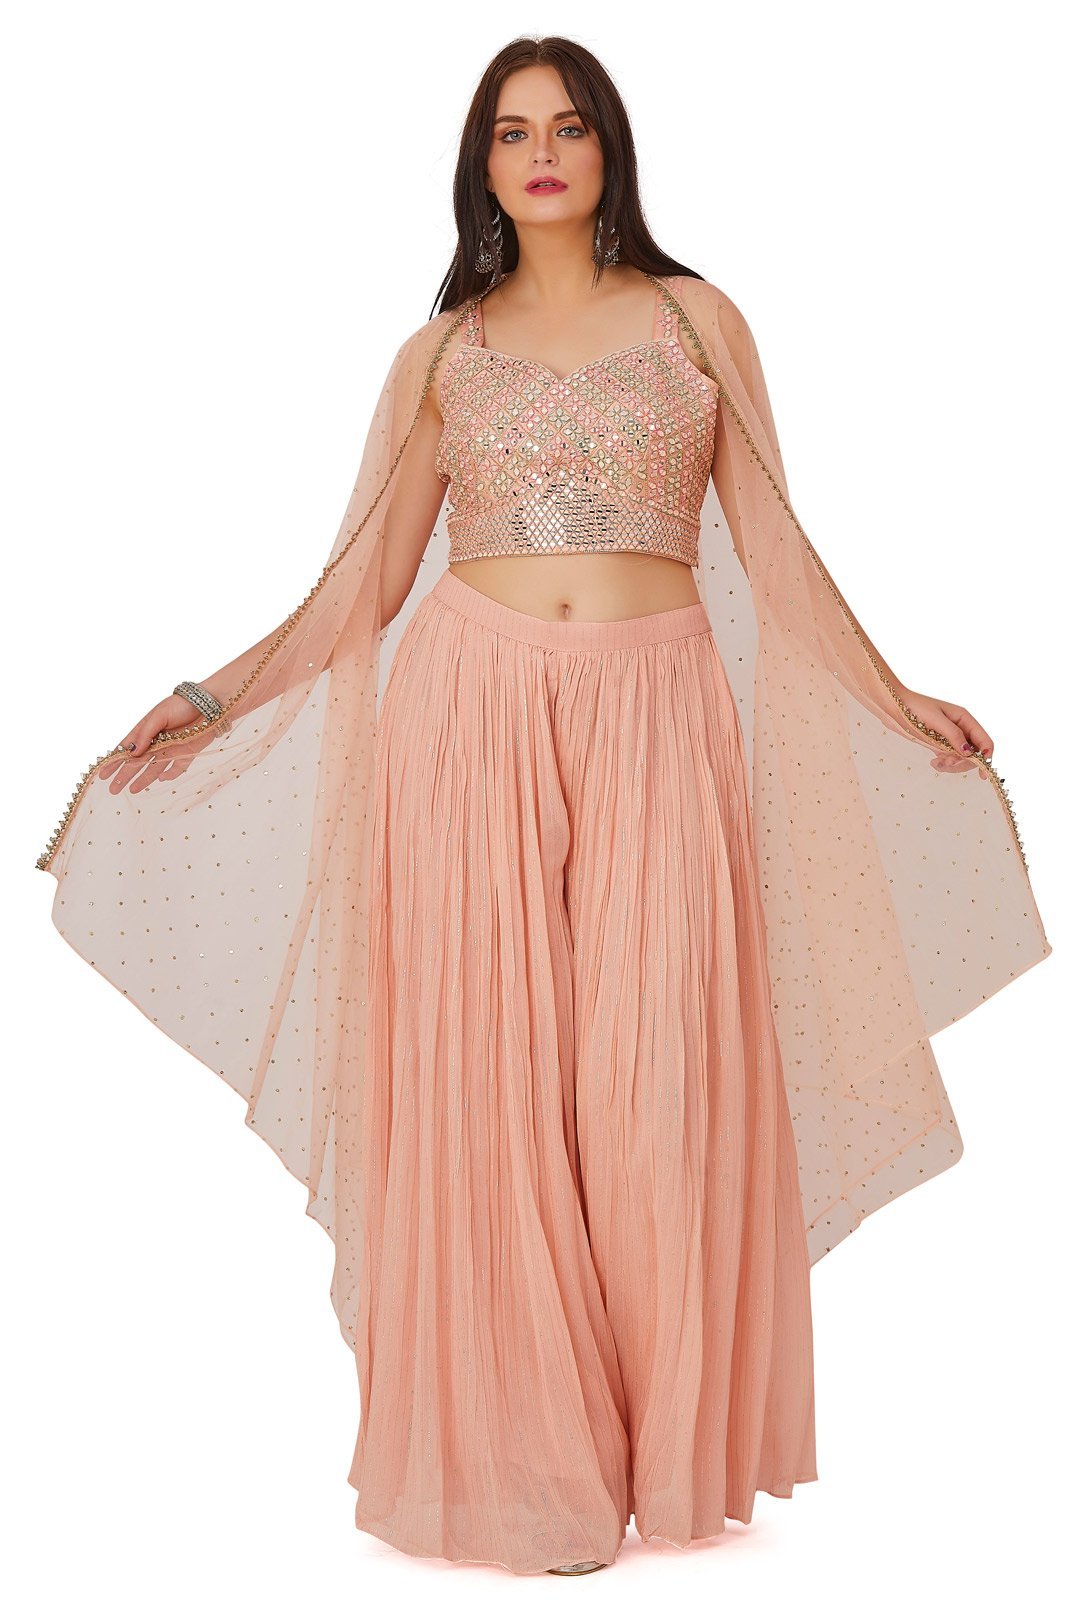 sparkling-peach-mirrorwork-palazzo-set-with-cape_4bcc8320-8482-44d0-b308-a8810d925f12